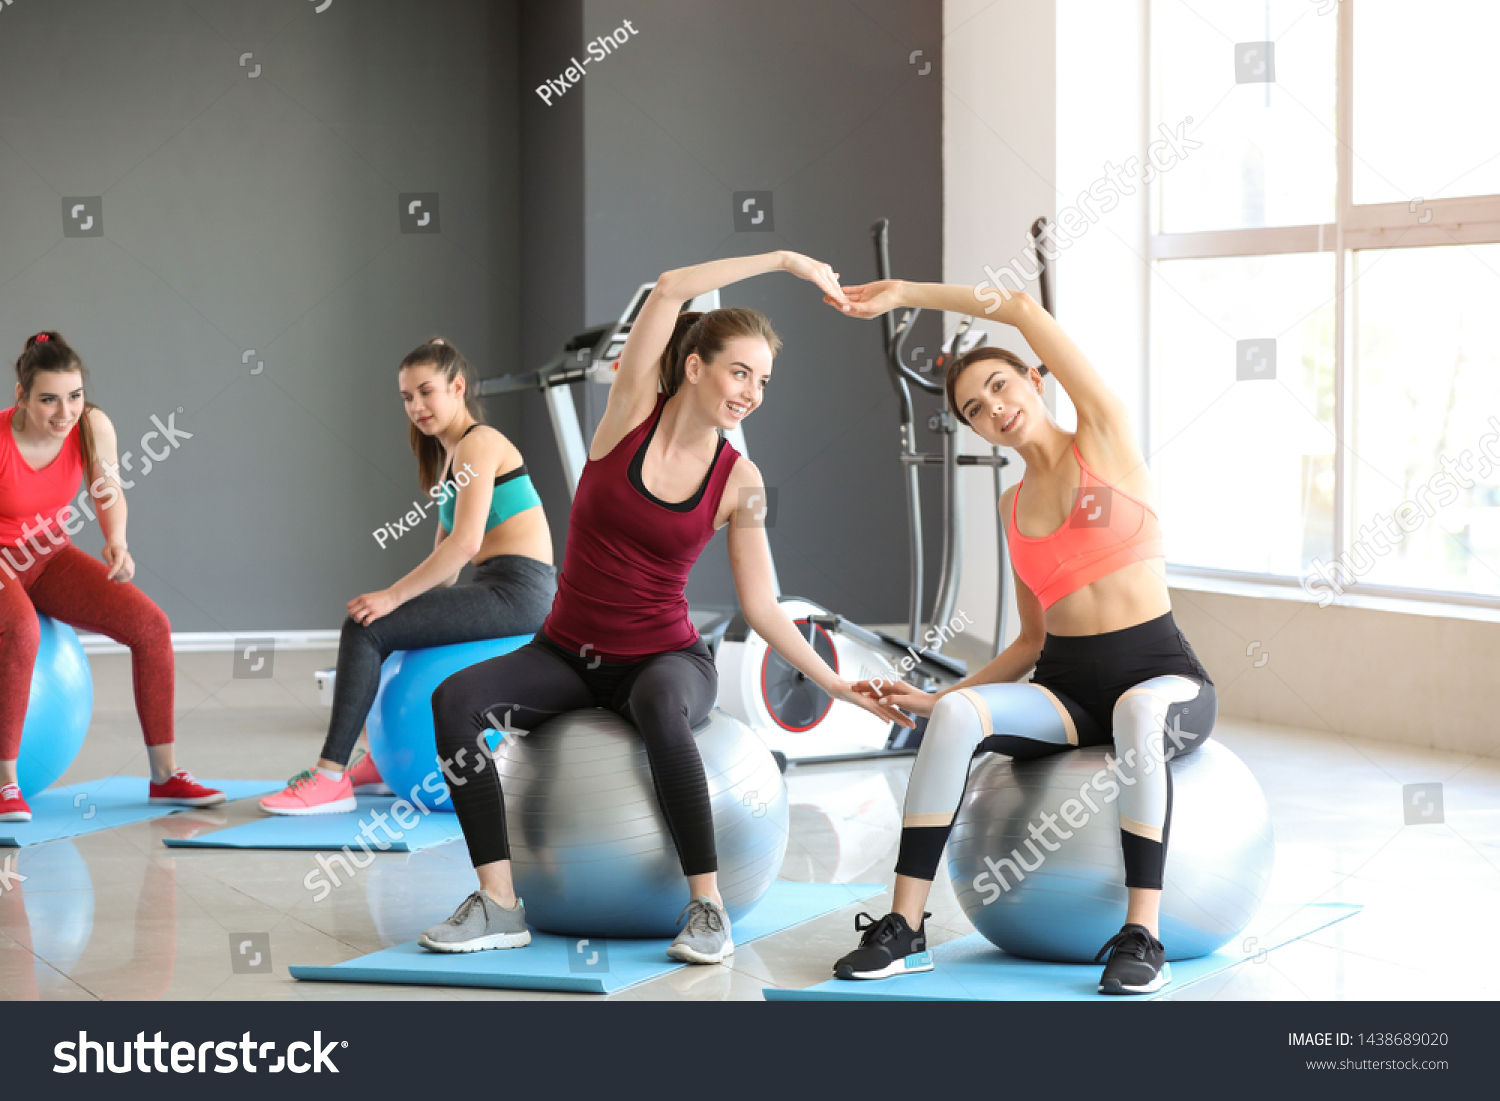 Young sporty women doing exercises with fitballs in gym #1438689020